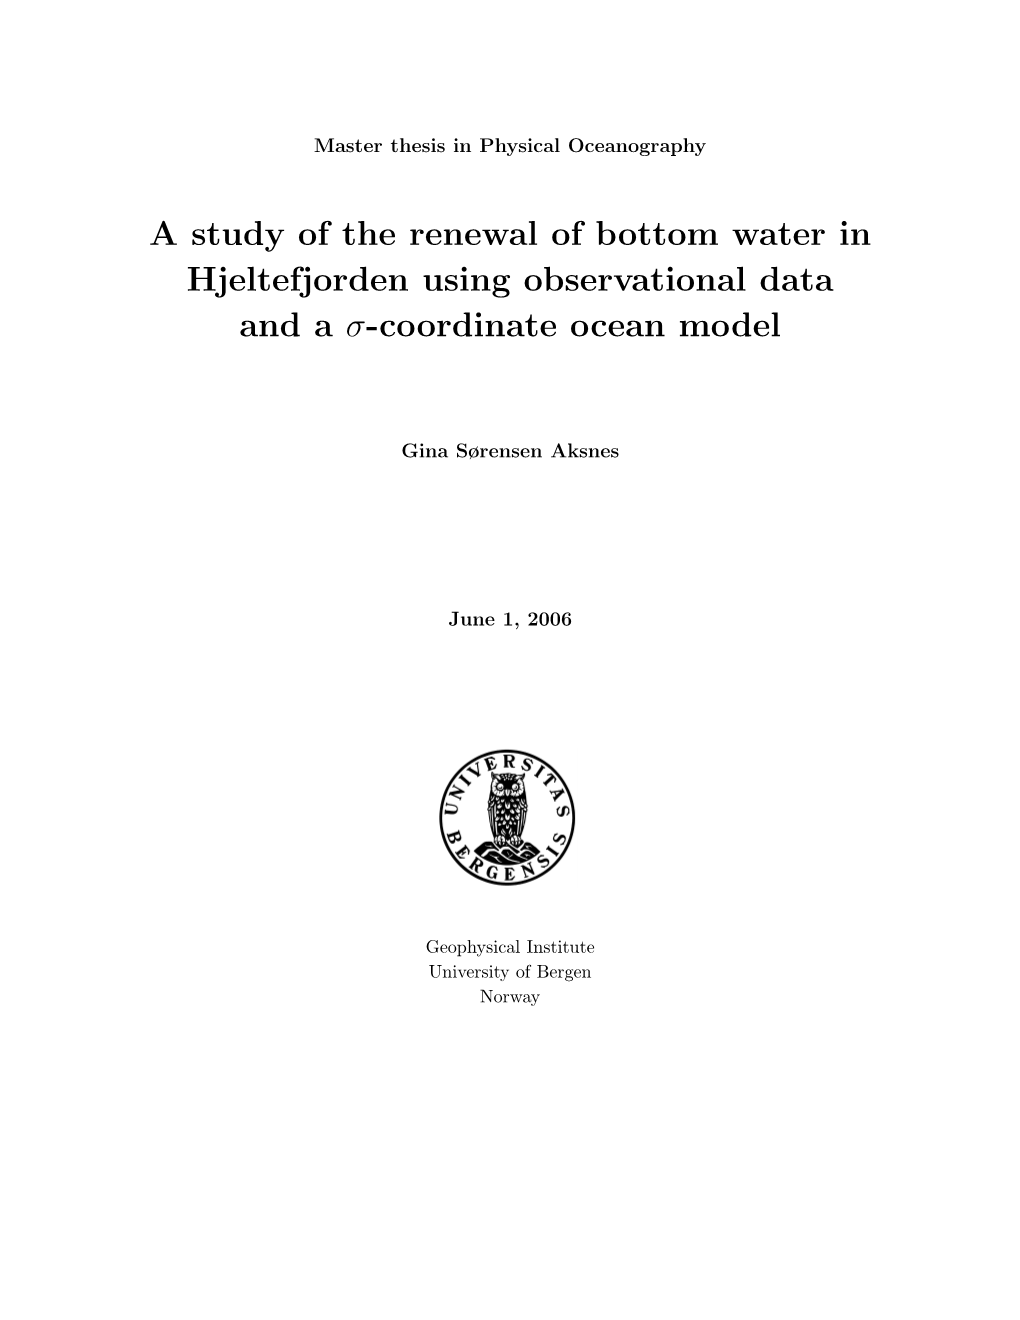 A Study of the Renewal of Bottom Water in Hjeltefjorden Using Observational Data and a Σ-Coordinate Ocean Model